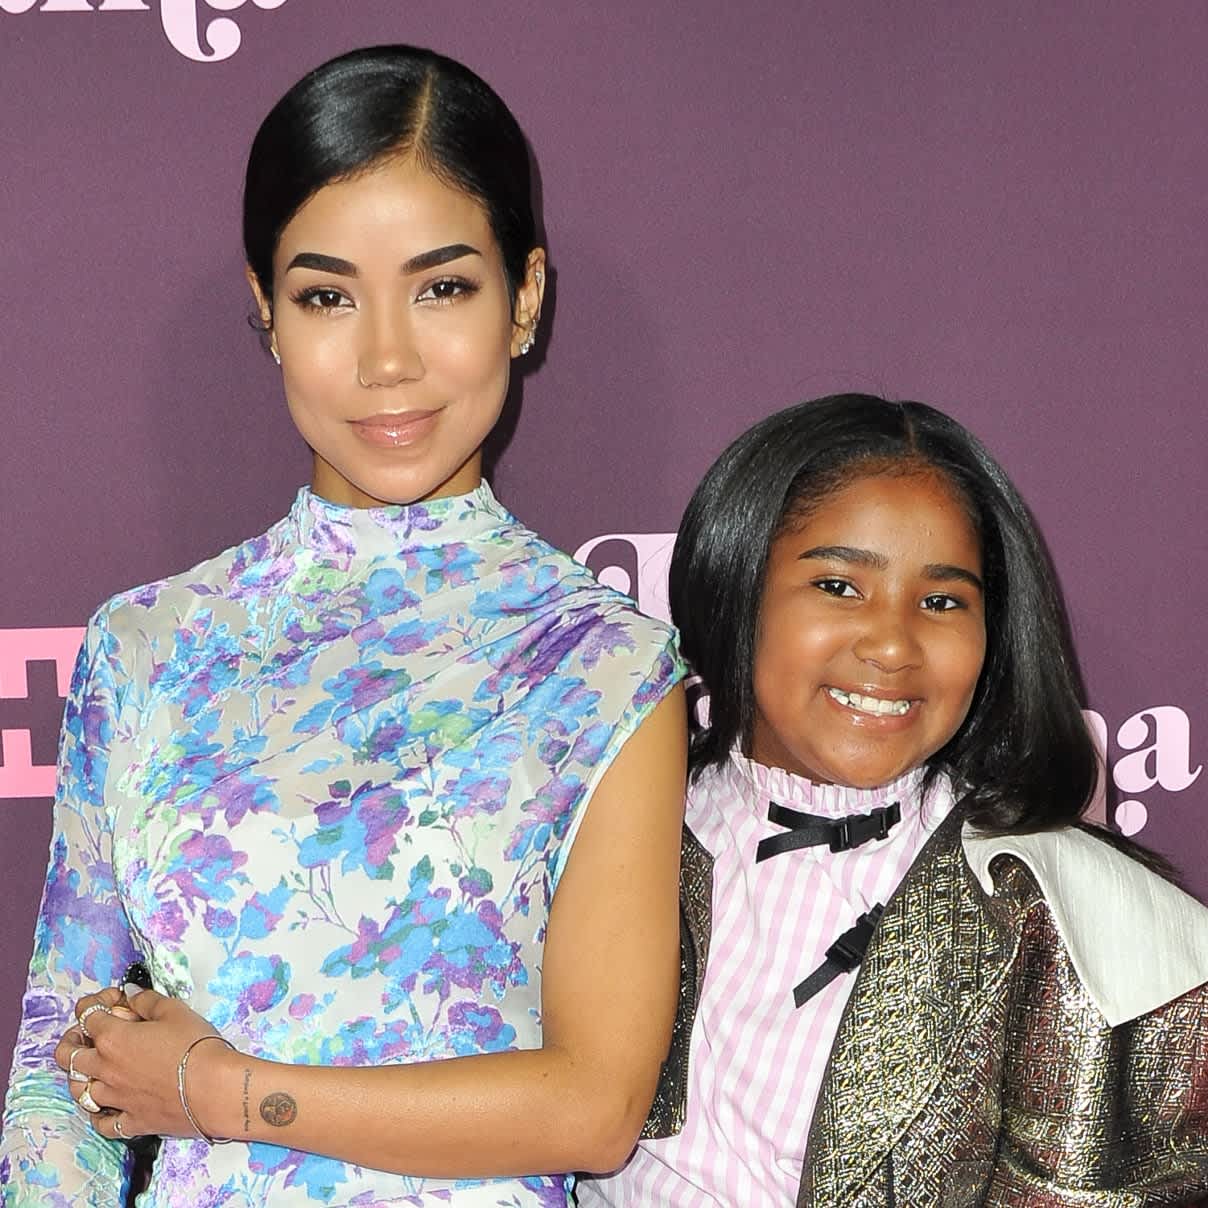 Aw, Next Time! Jhené Aiko Says Her Daughter Was "Too Cool" to Do a